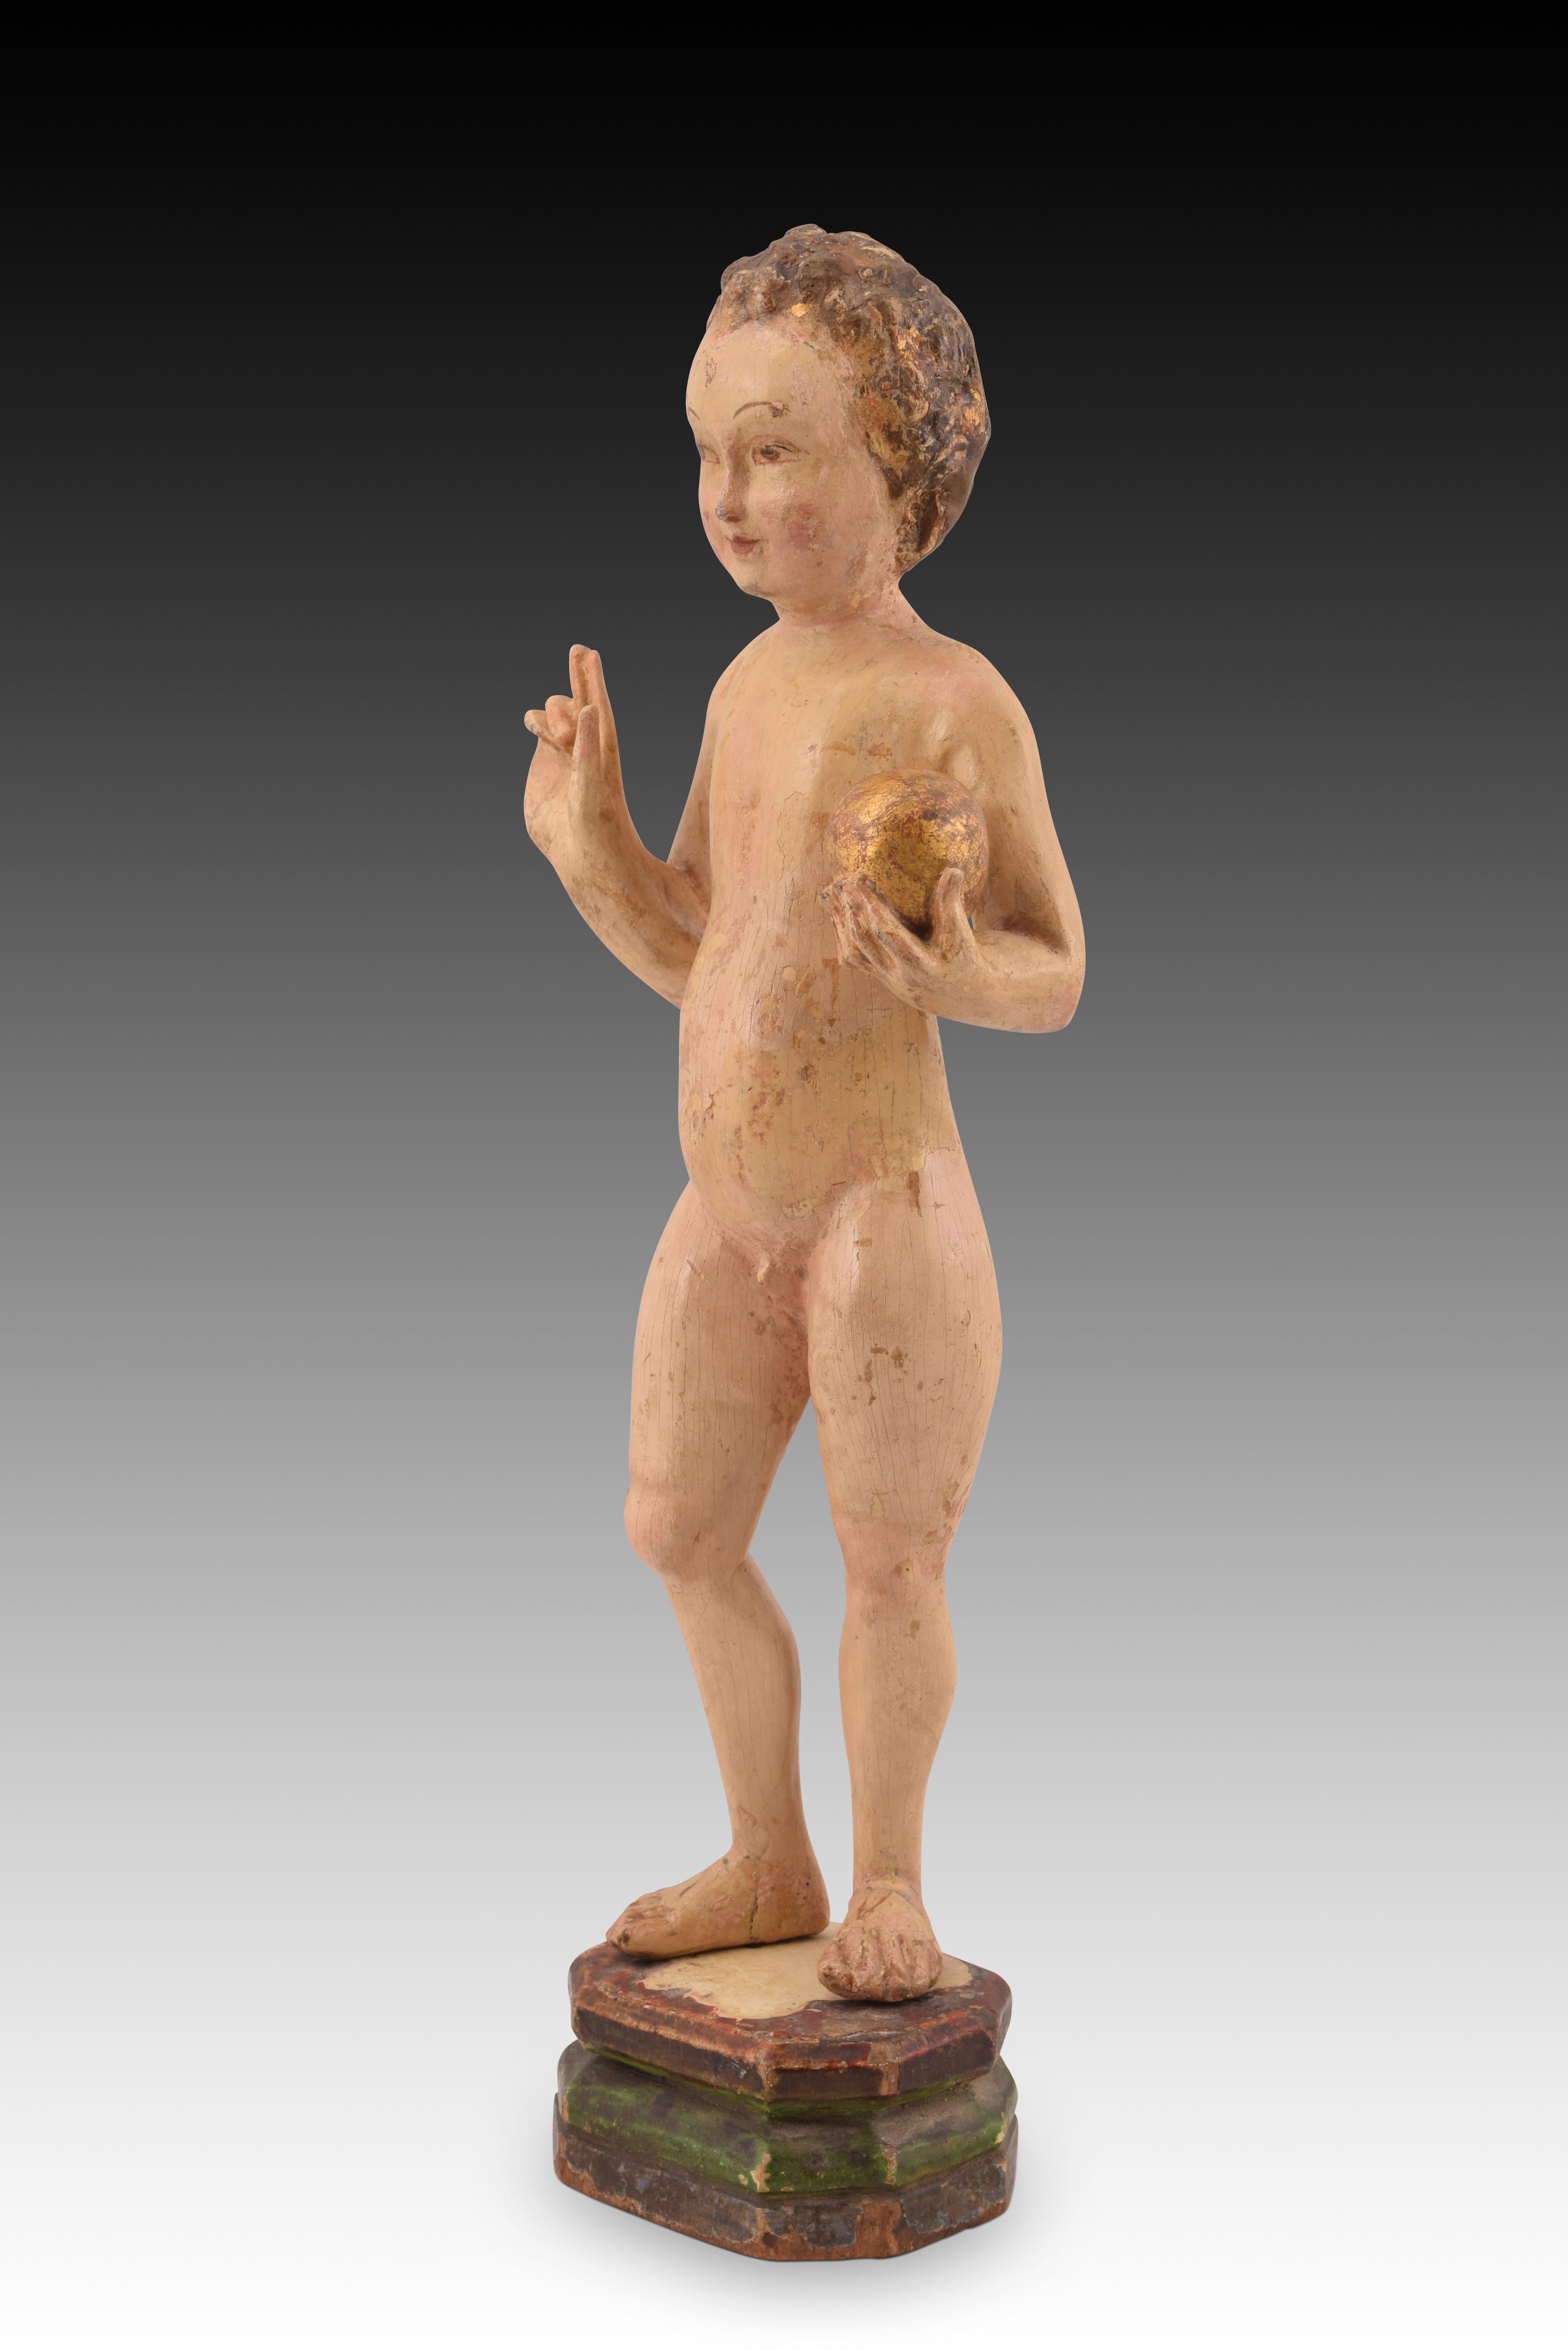 Child Jesus. Carved and polychrome wood. Flemish school, towards the first half of the 16th century. 
Restorations. 
Baby Jesus with polygonal base made of carved and polychrome wood. The figure is presented naked, standing, with the right hand